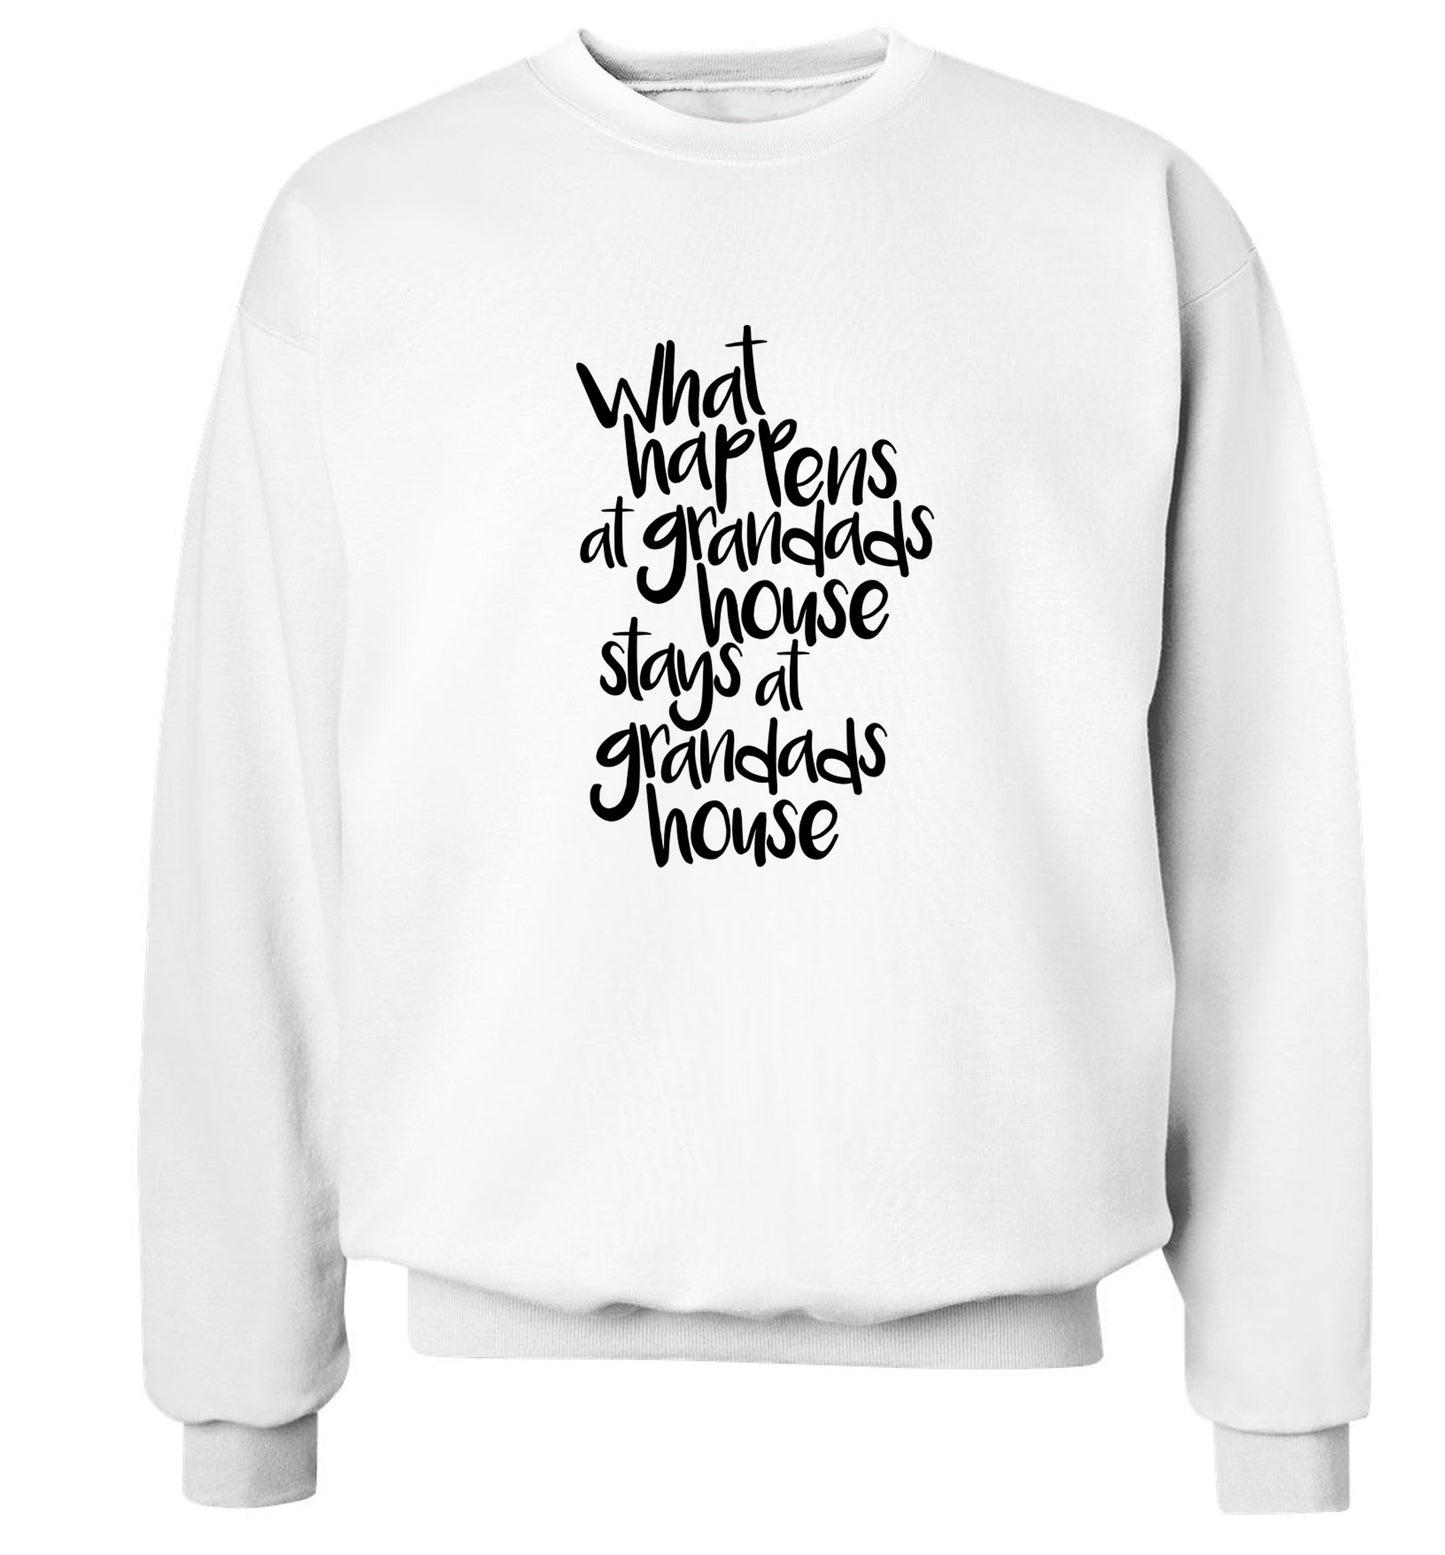 What happens at grandads house stays at grandads house Adult's unisex white Sweater 2XL